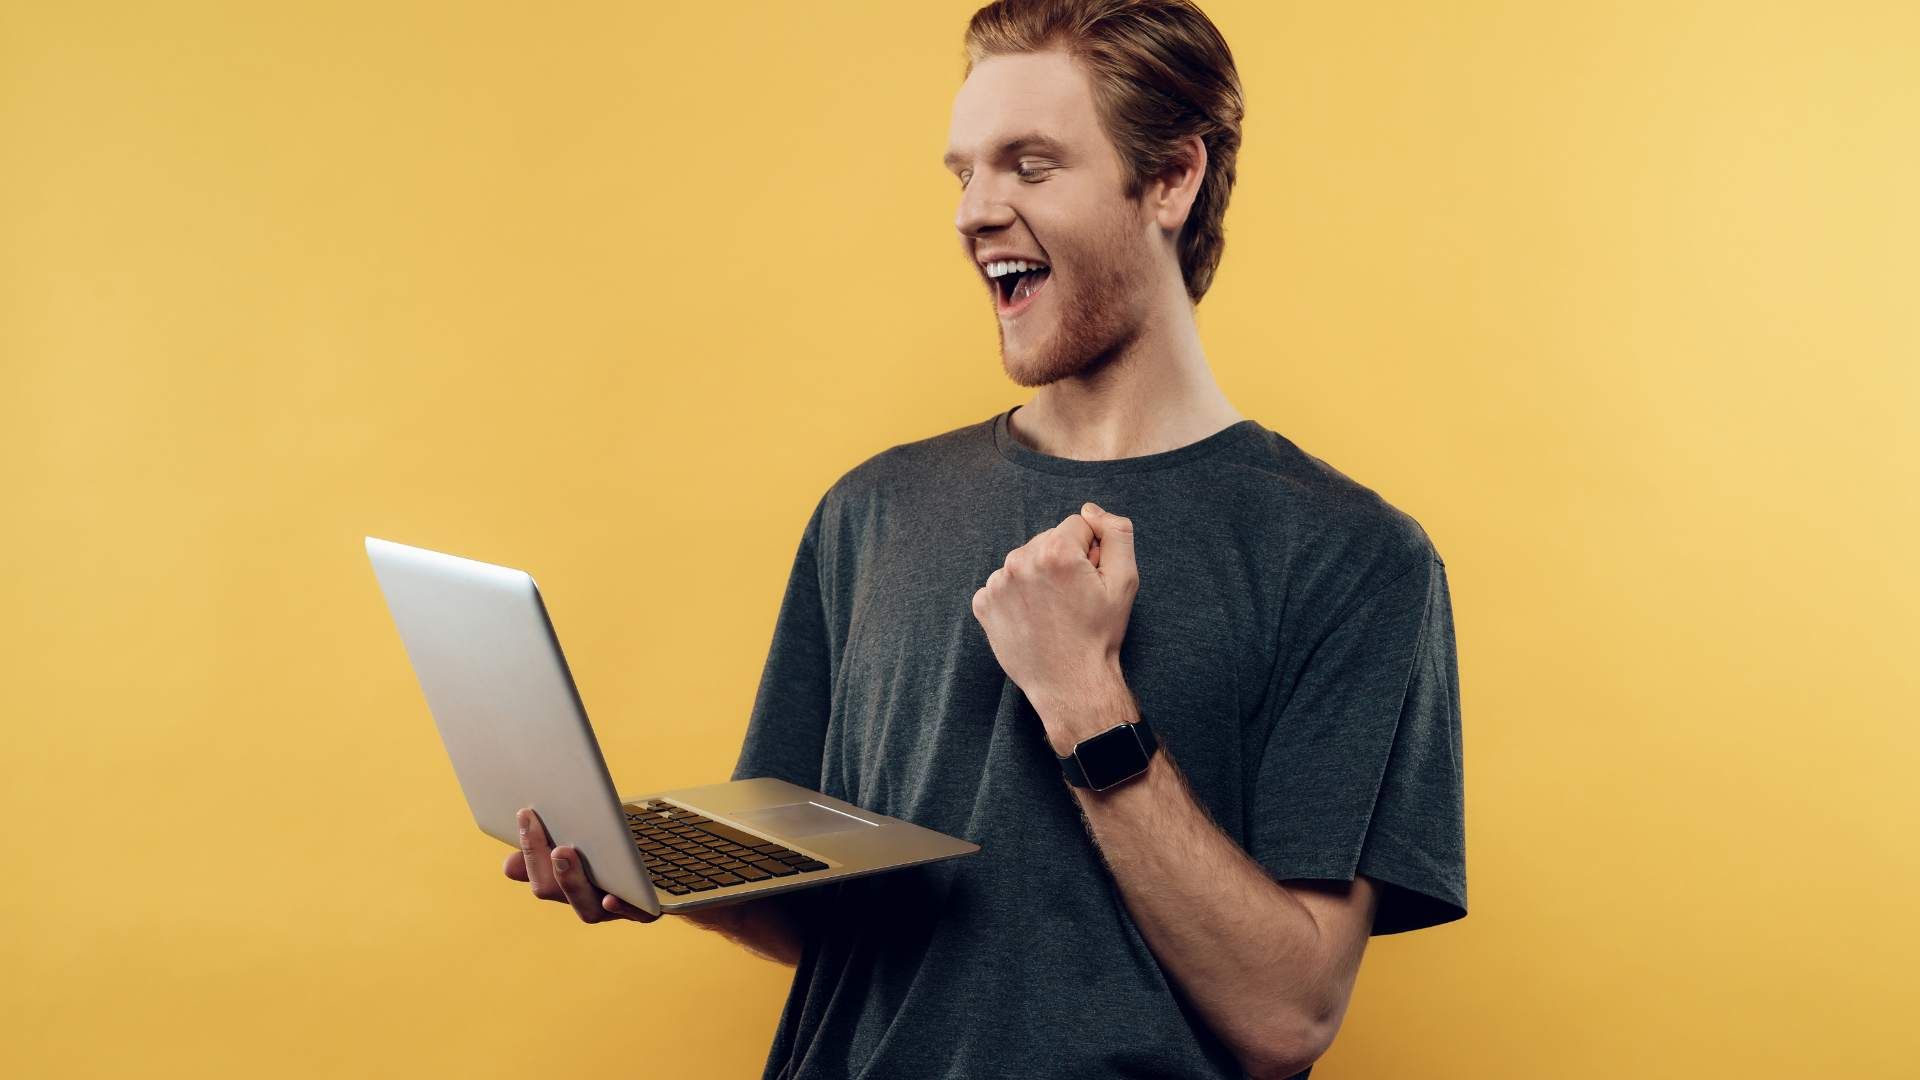 A person with short brown hair, wearing a dark shirt and holding a laptop in their hands while looking happy and proud.